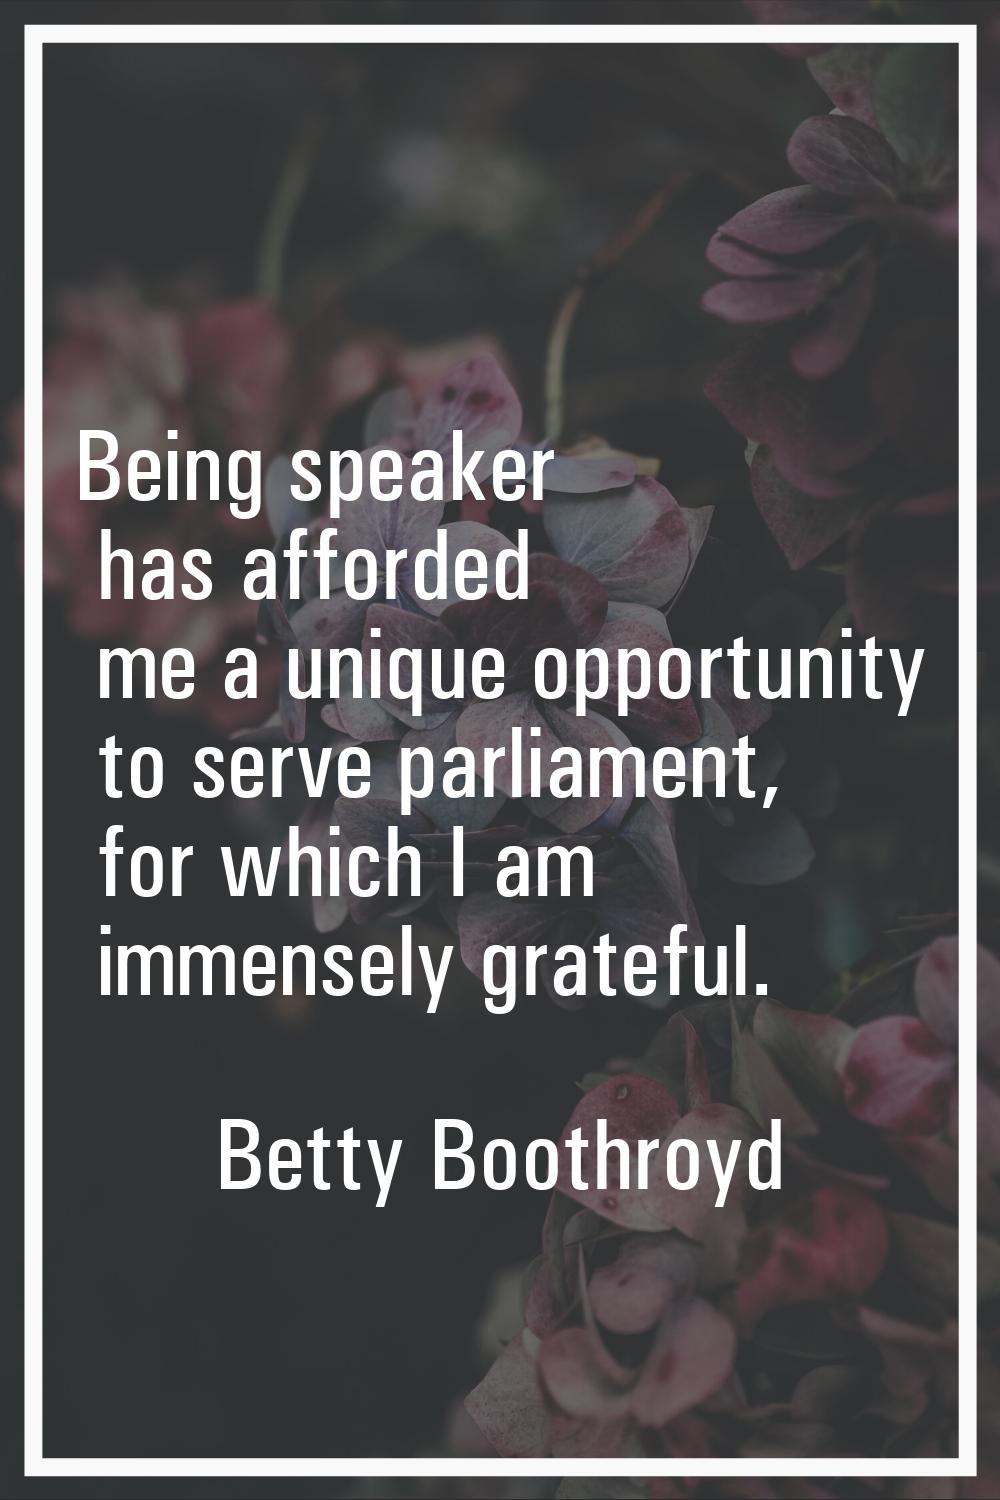 Being speaker has afforded me a unique opportunity to serve parliament, for which I am immensely gr